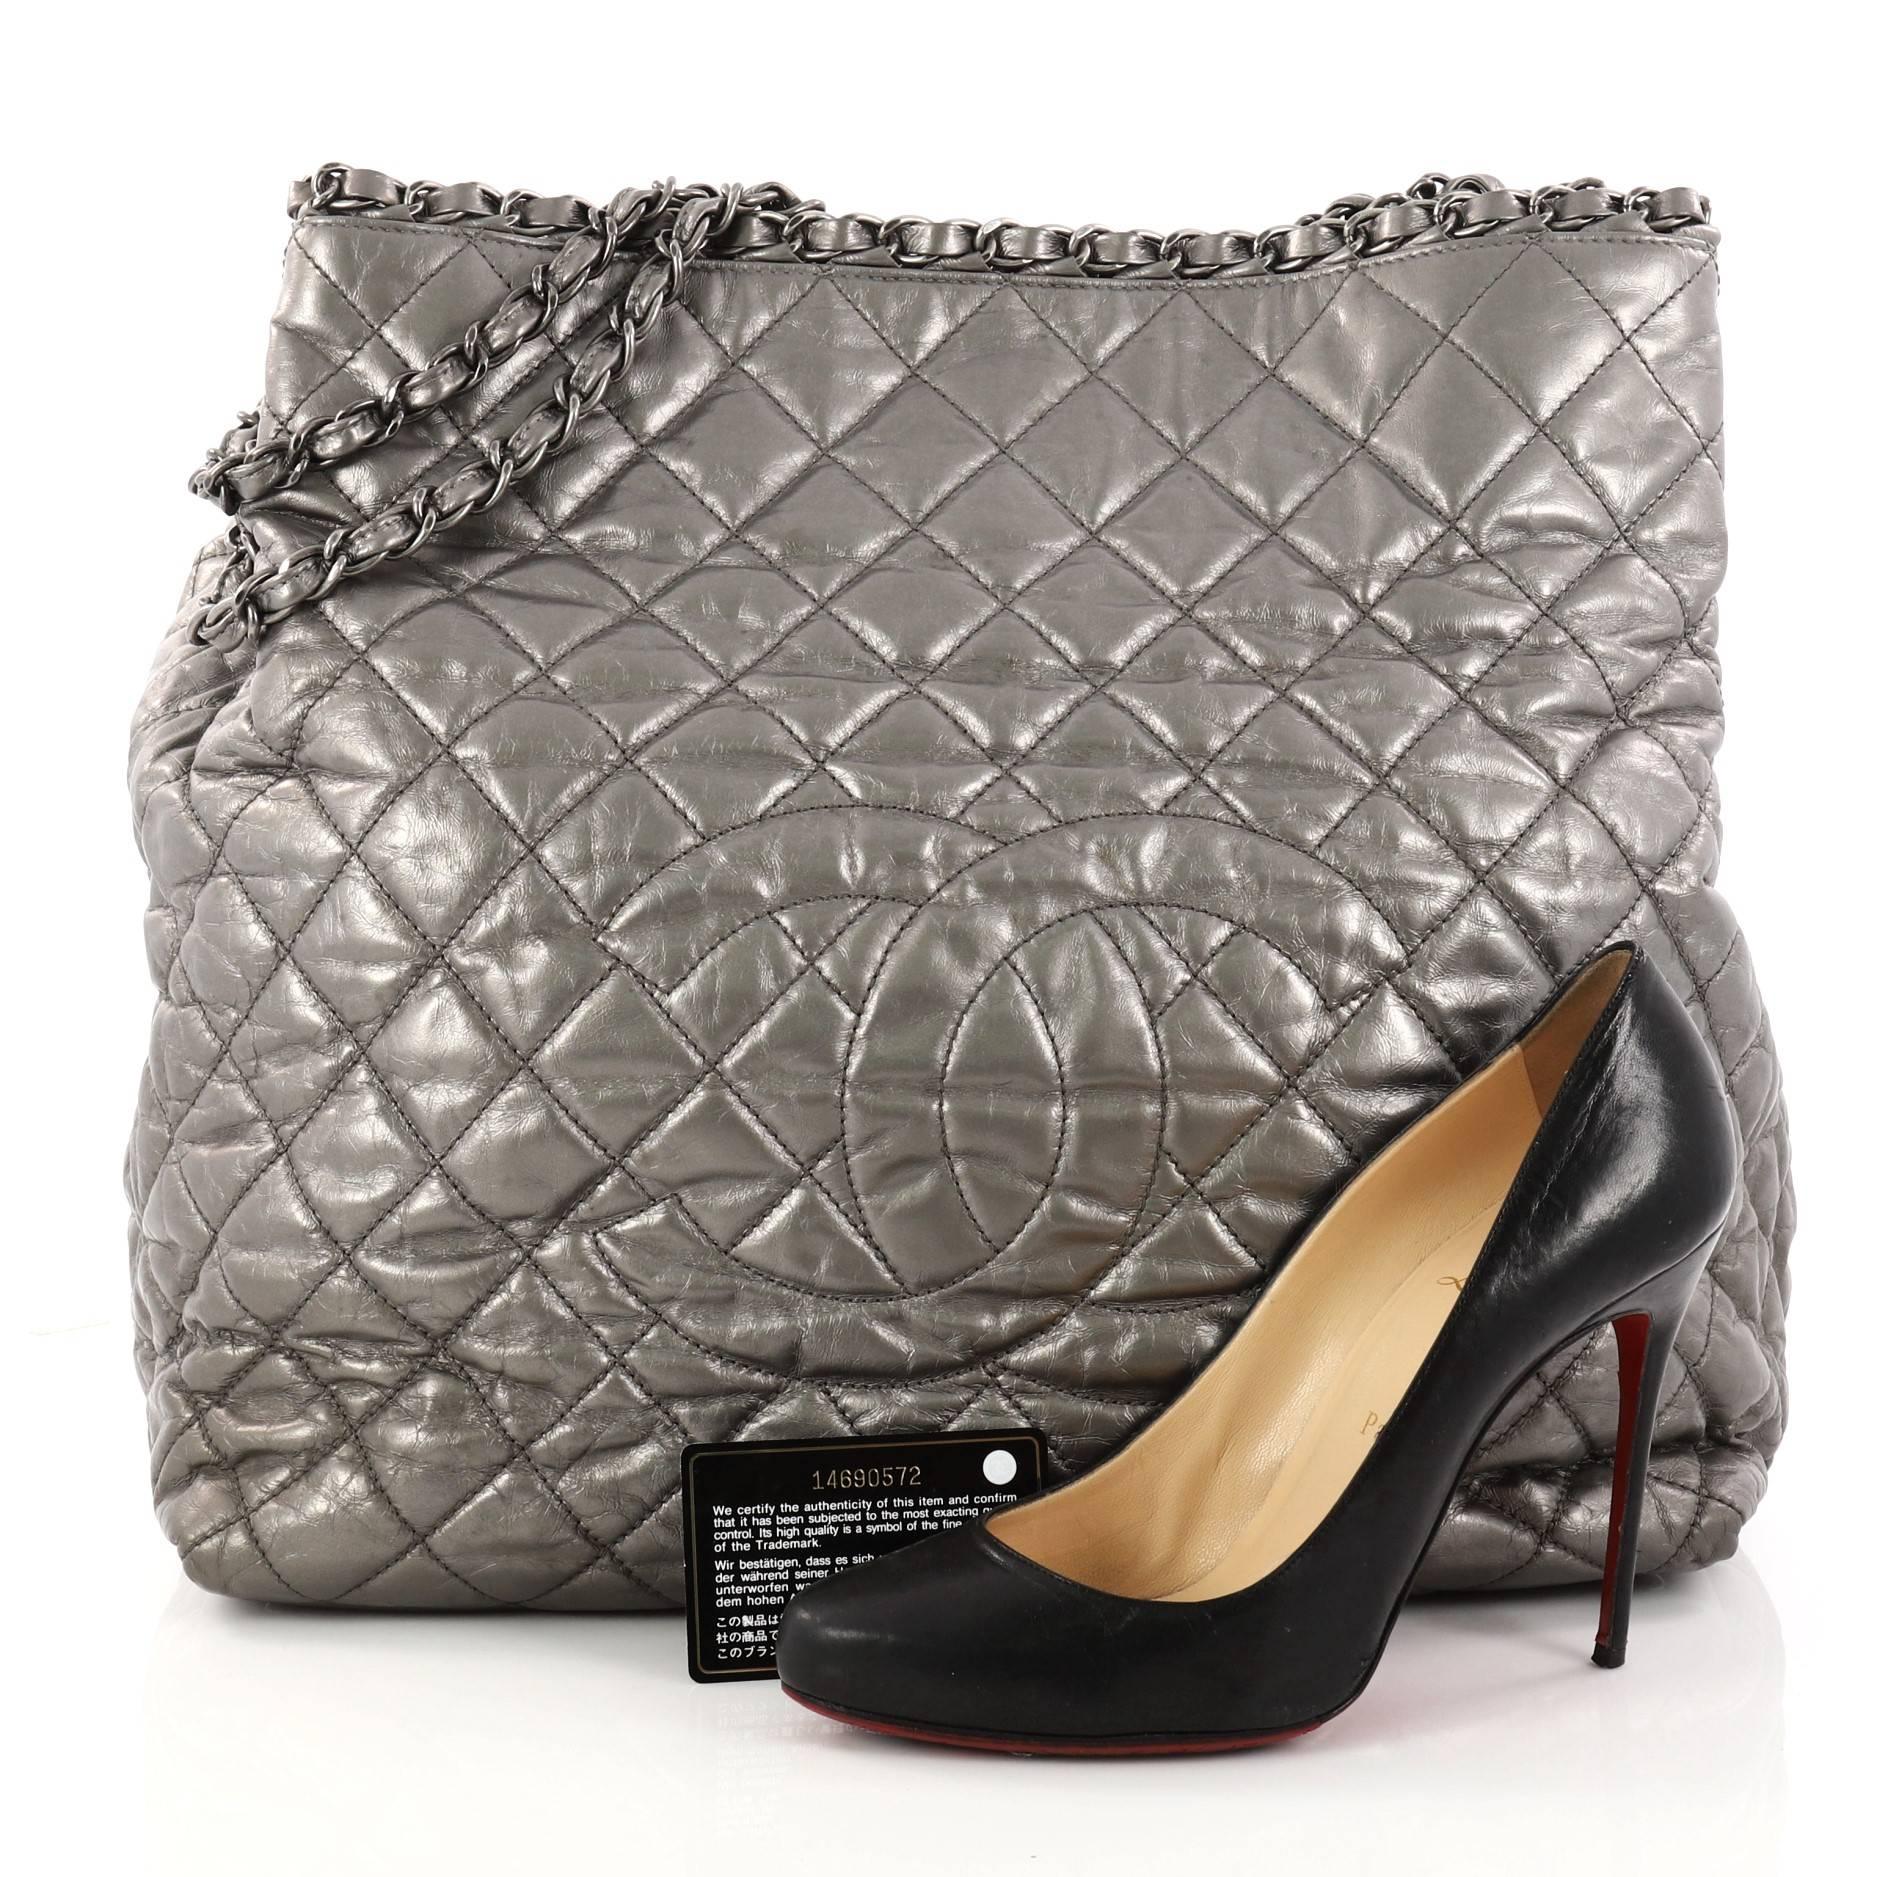 This authentic Chanel Chain Me Tote Quilted Calfskin Large showcases a modern classic design perfect for the on-the-go woman. Beautifully crafted from diamond quilted silver metallic calfskin leather, this stunning tote features woven-in leather